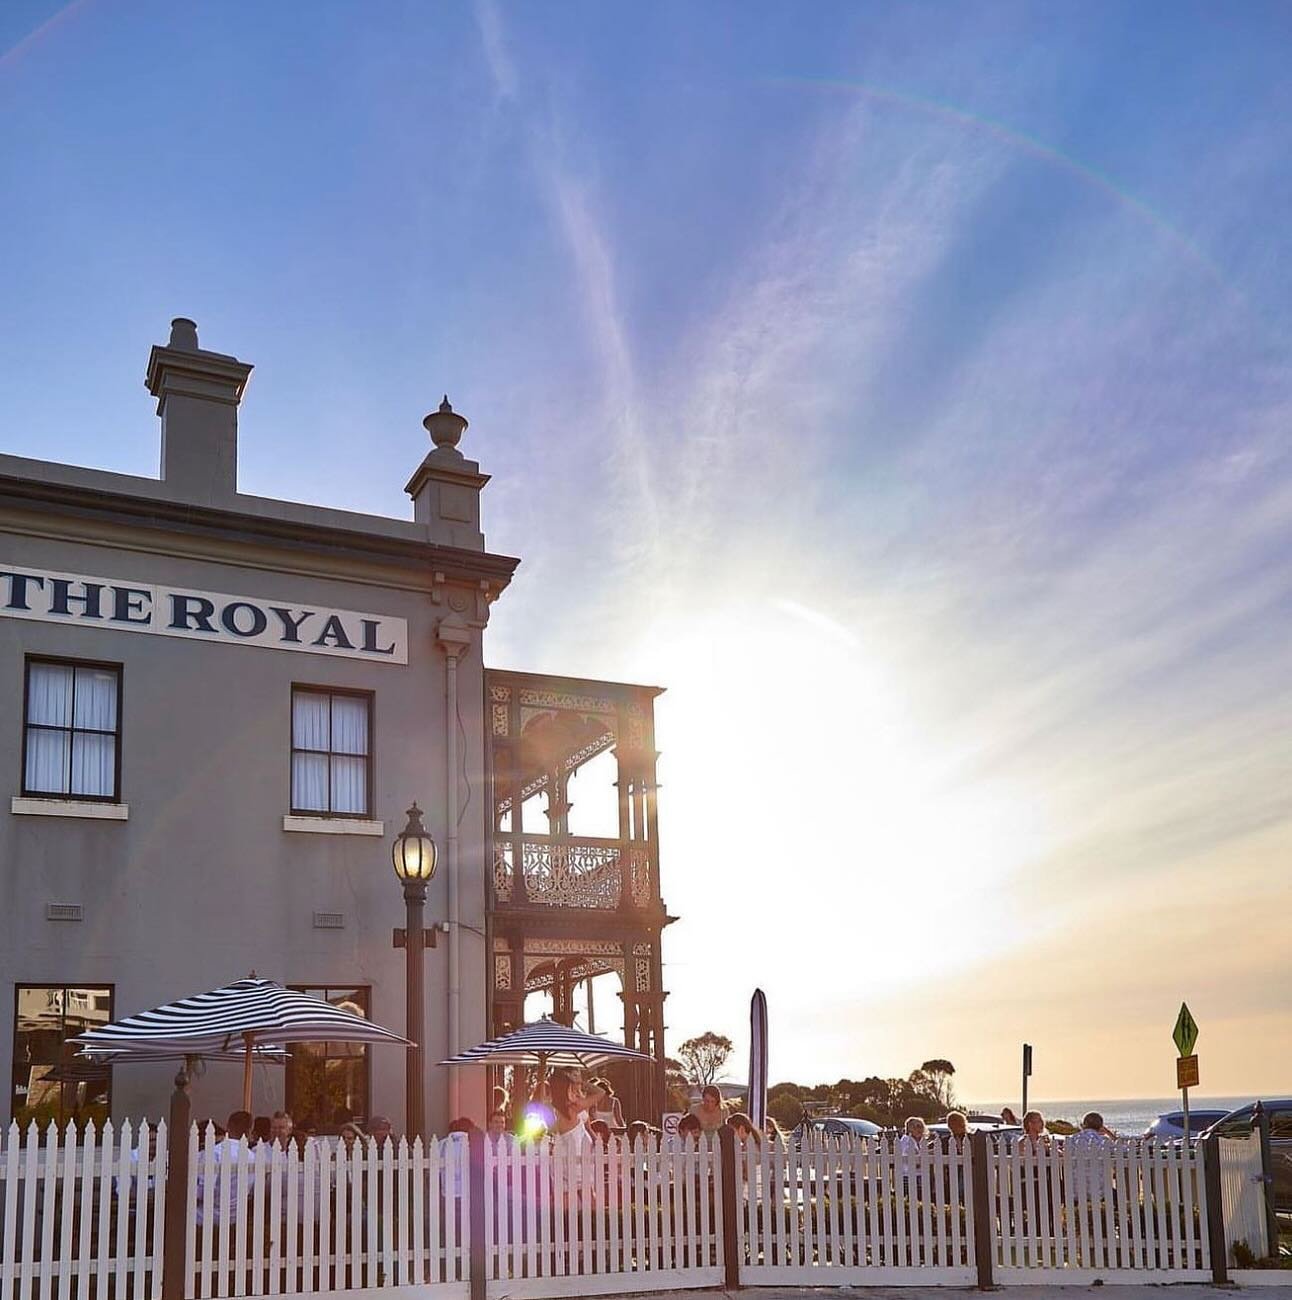 Enjoying a delicious dinner at the Royal Hotel while soaking up the last of the sunshine ☀️🍴Who knows , your might catch the most beautiful sunset while you&rsquo;re at it 🌅